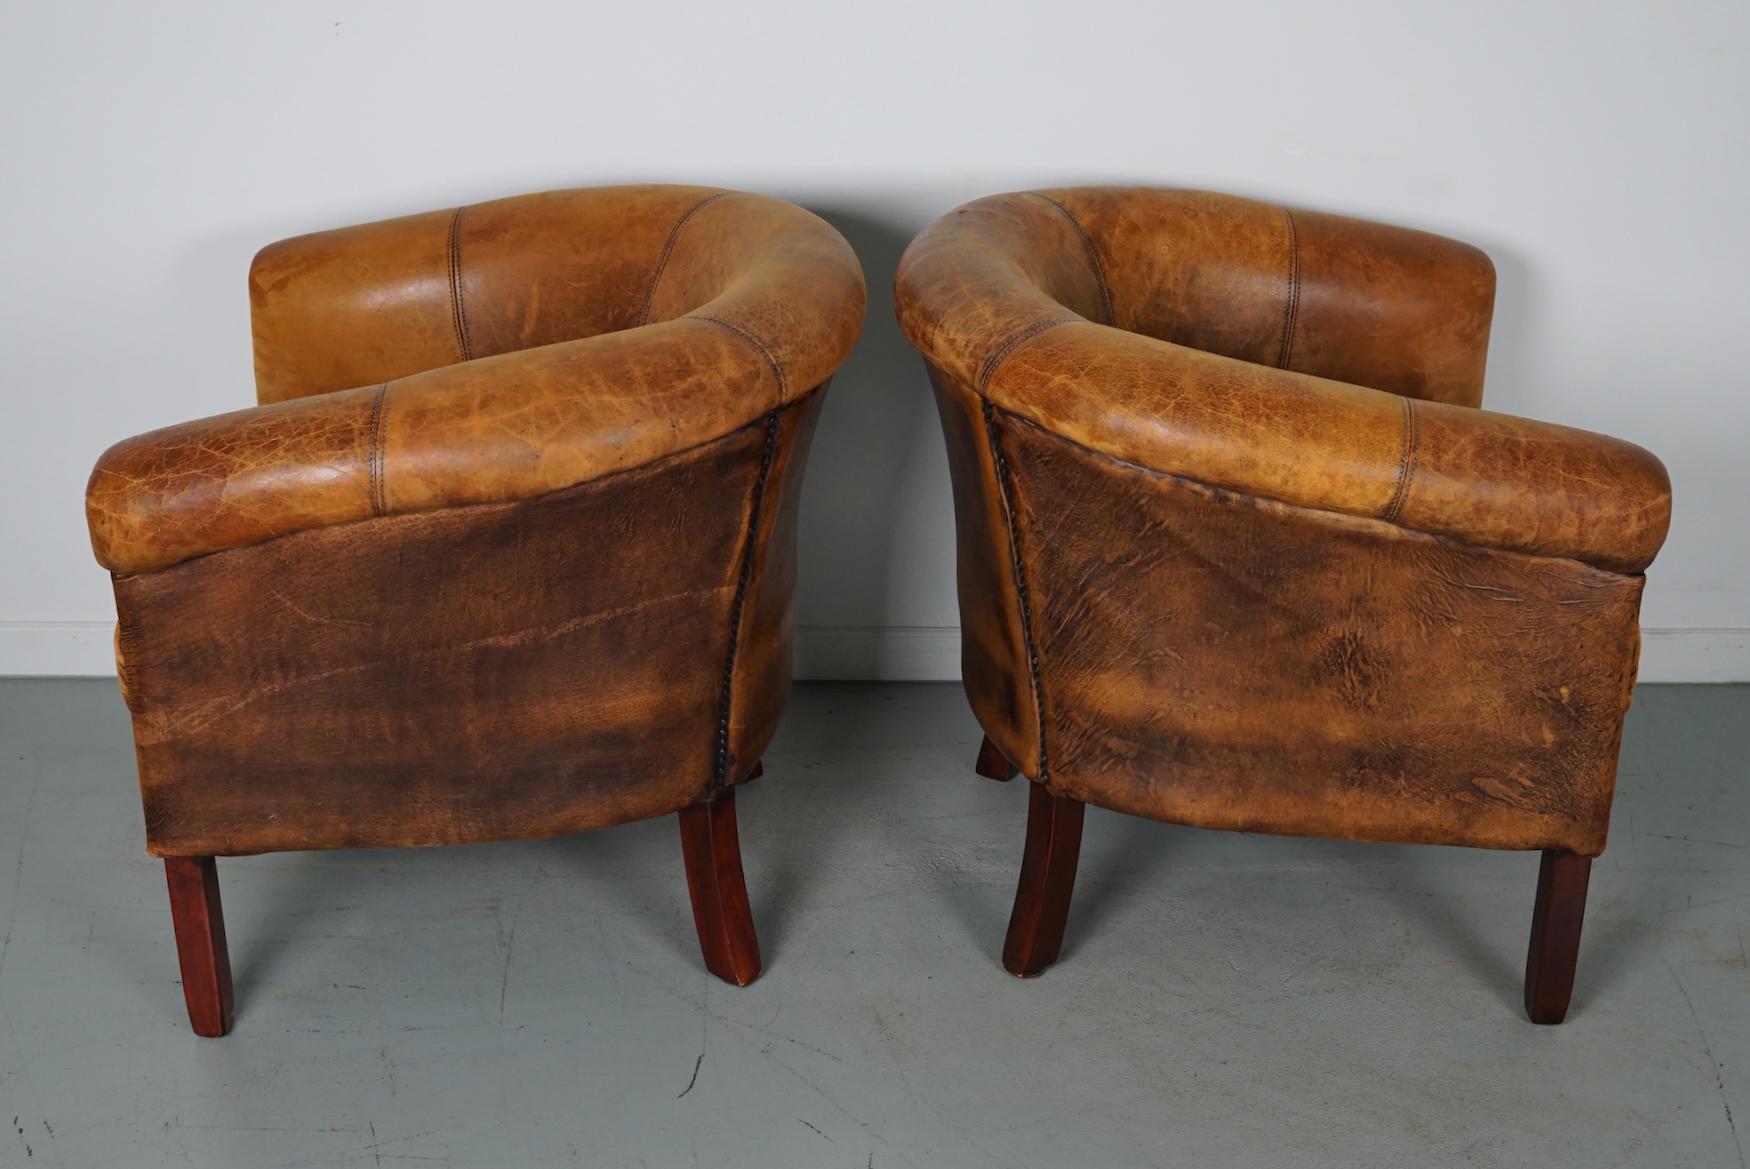 Vintage Dutch Cognac Colored Leather Club Chair, Set of 2 with Footstools For Sale 11